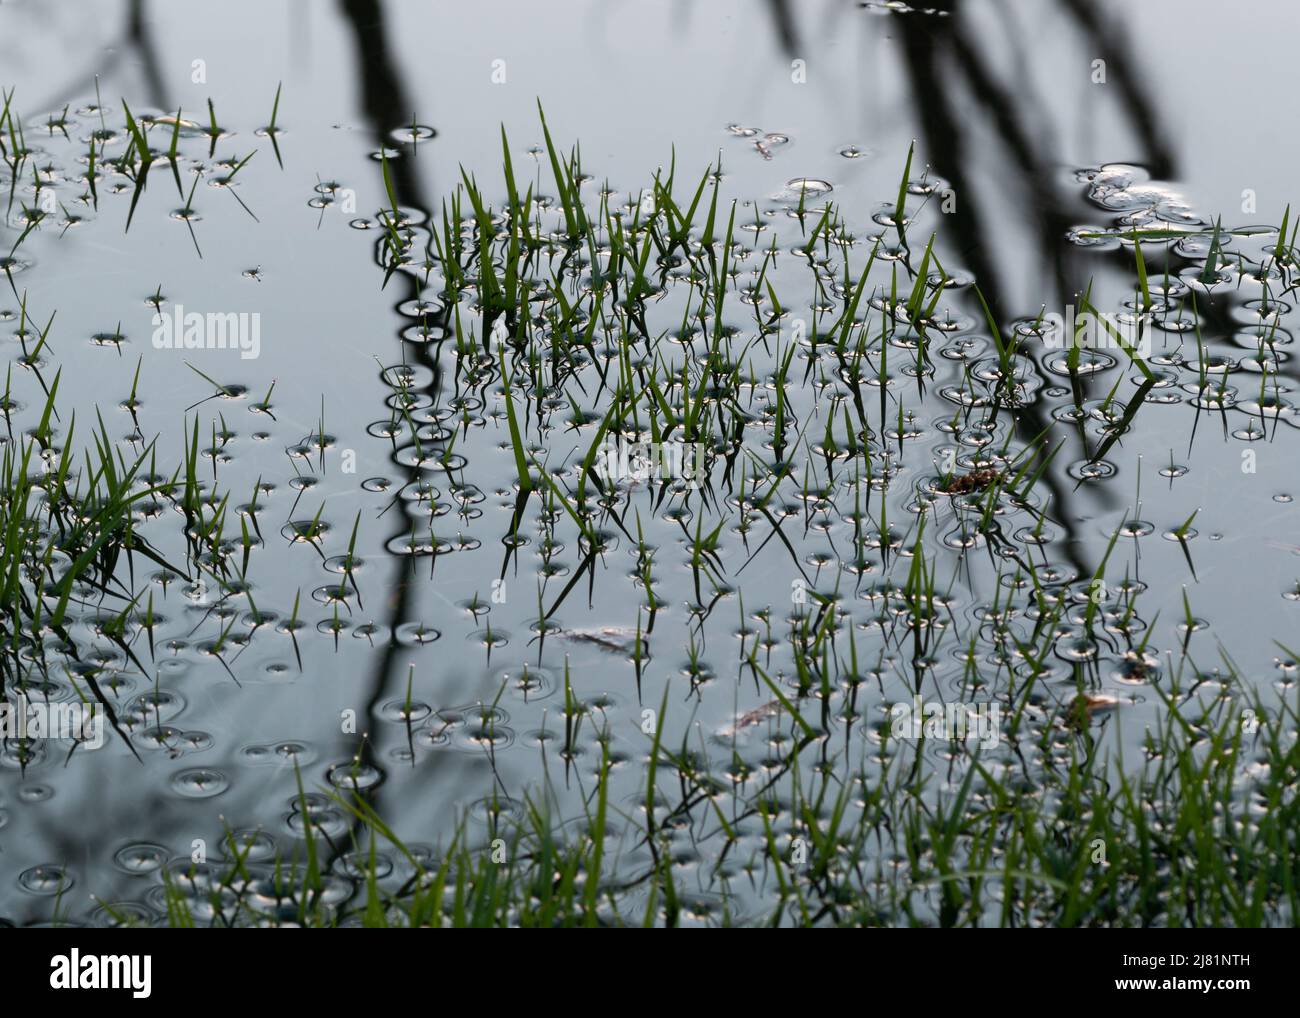 Surface tension around flooded grass blades close up, water drops on grass tips Stock Photo